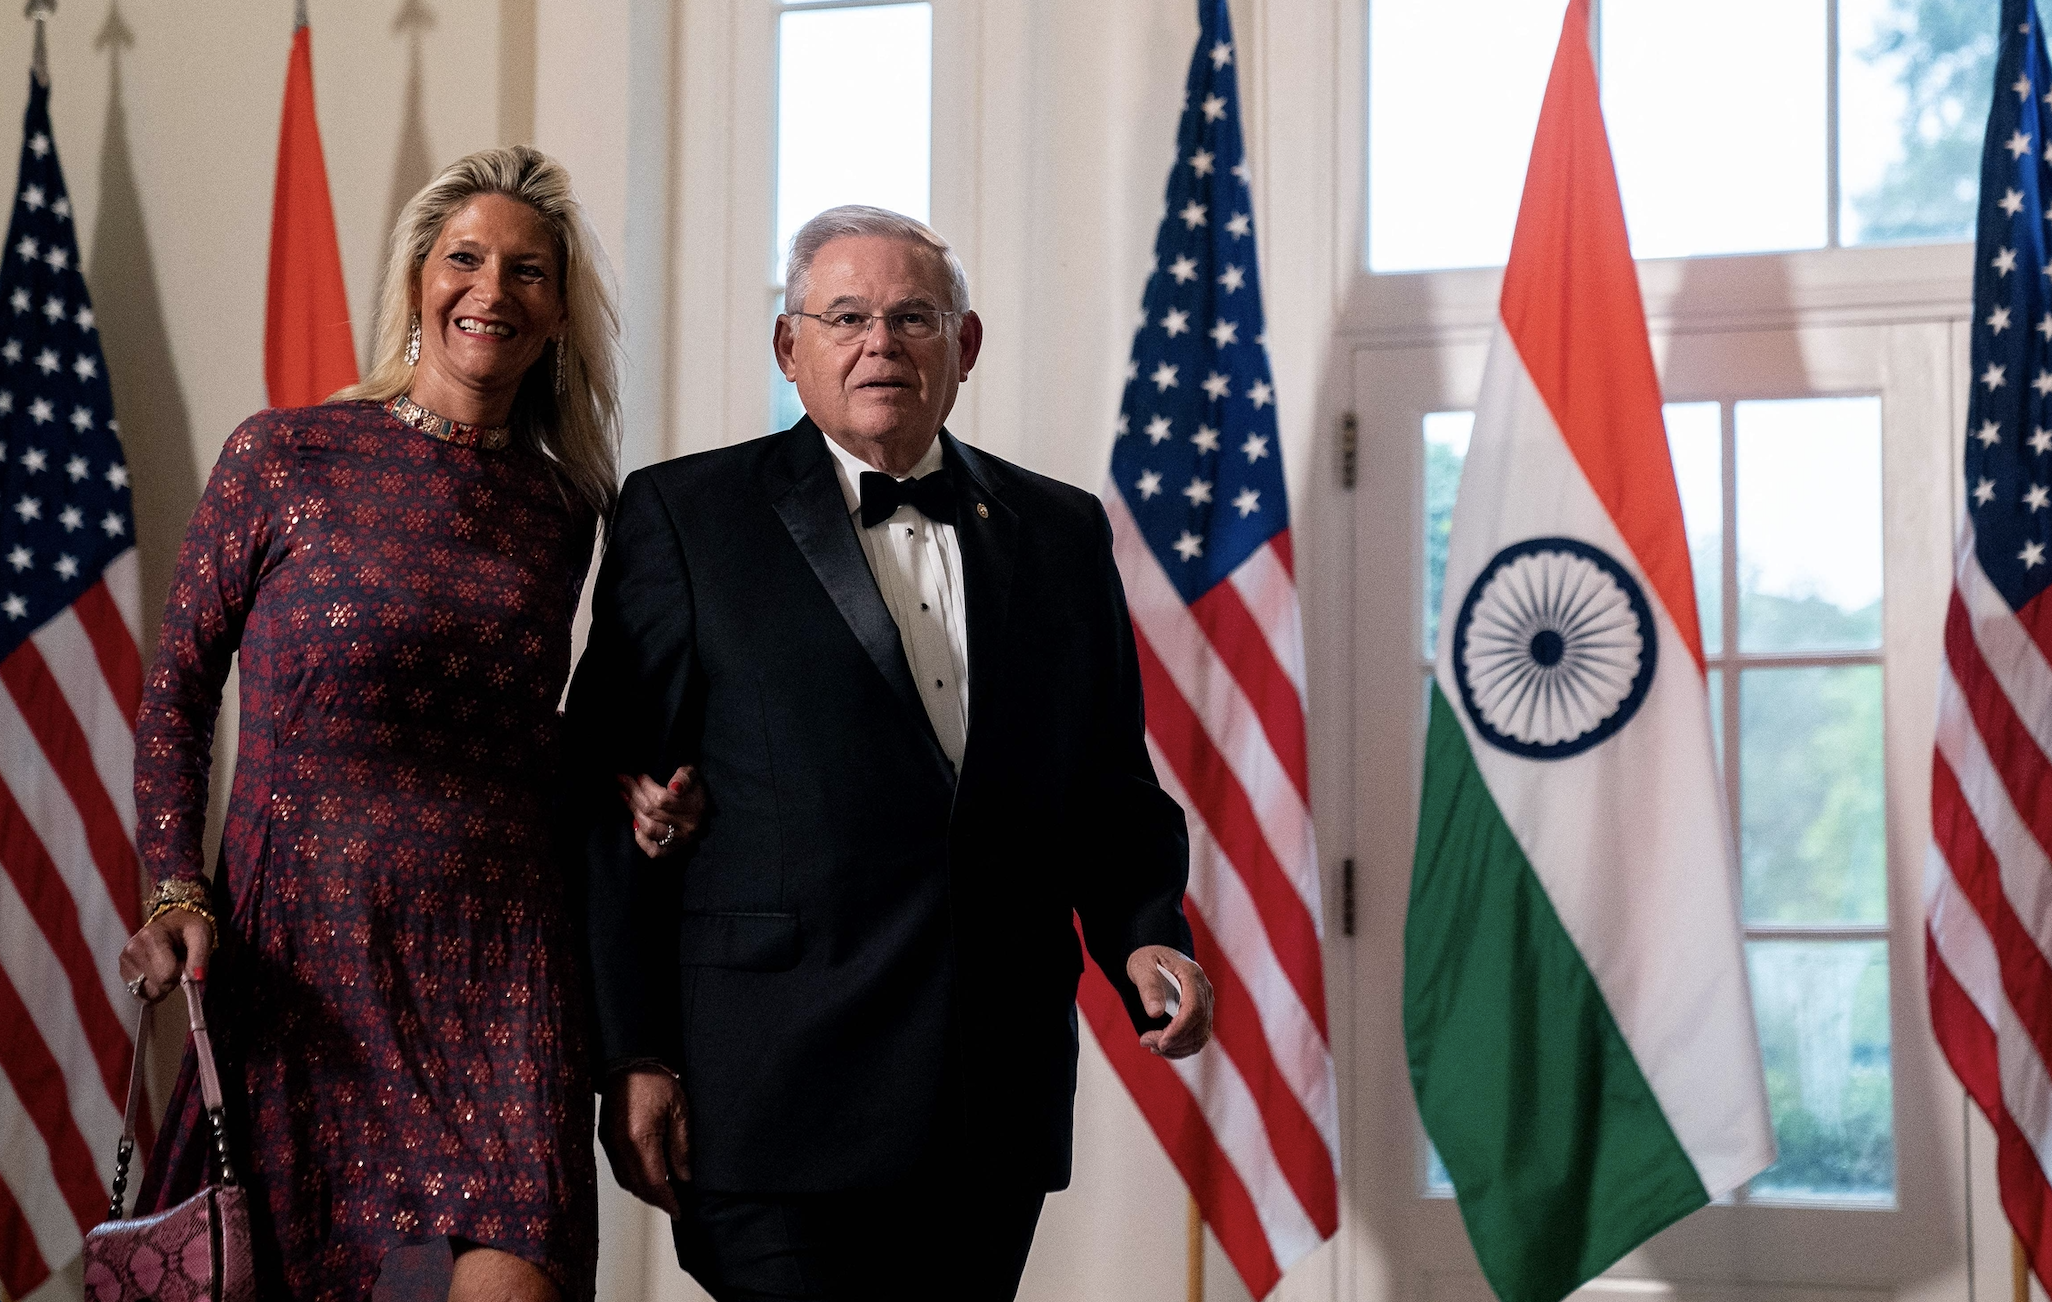 Bob Menendez and his wife stand inside the White House in front of a row of US and India flags.